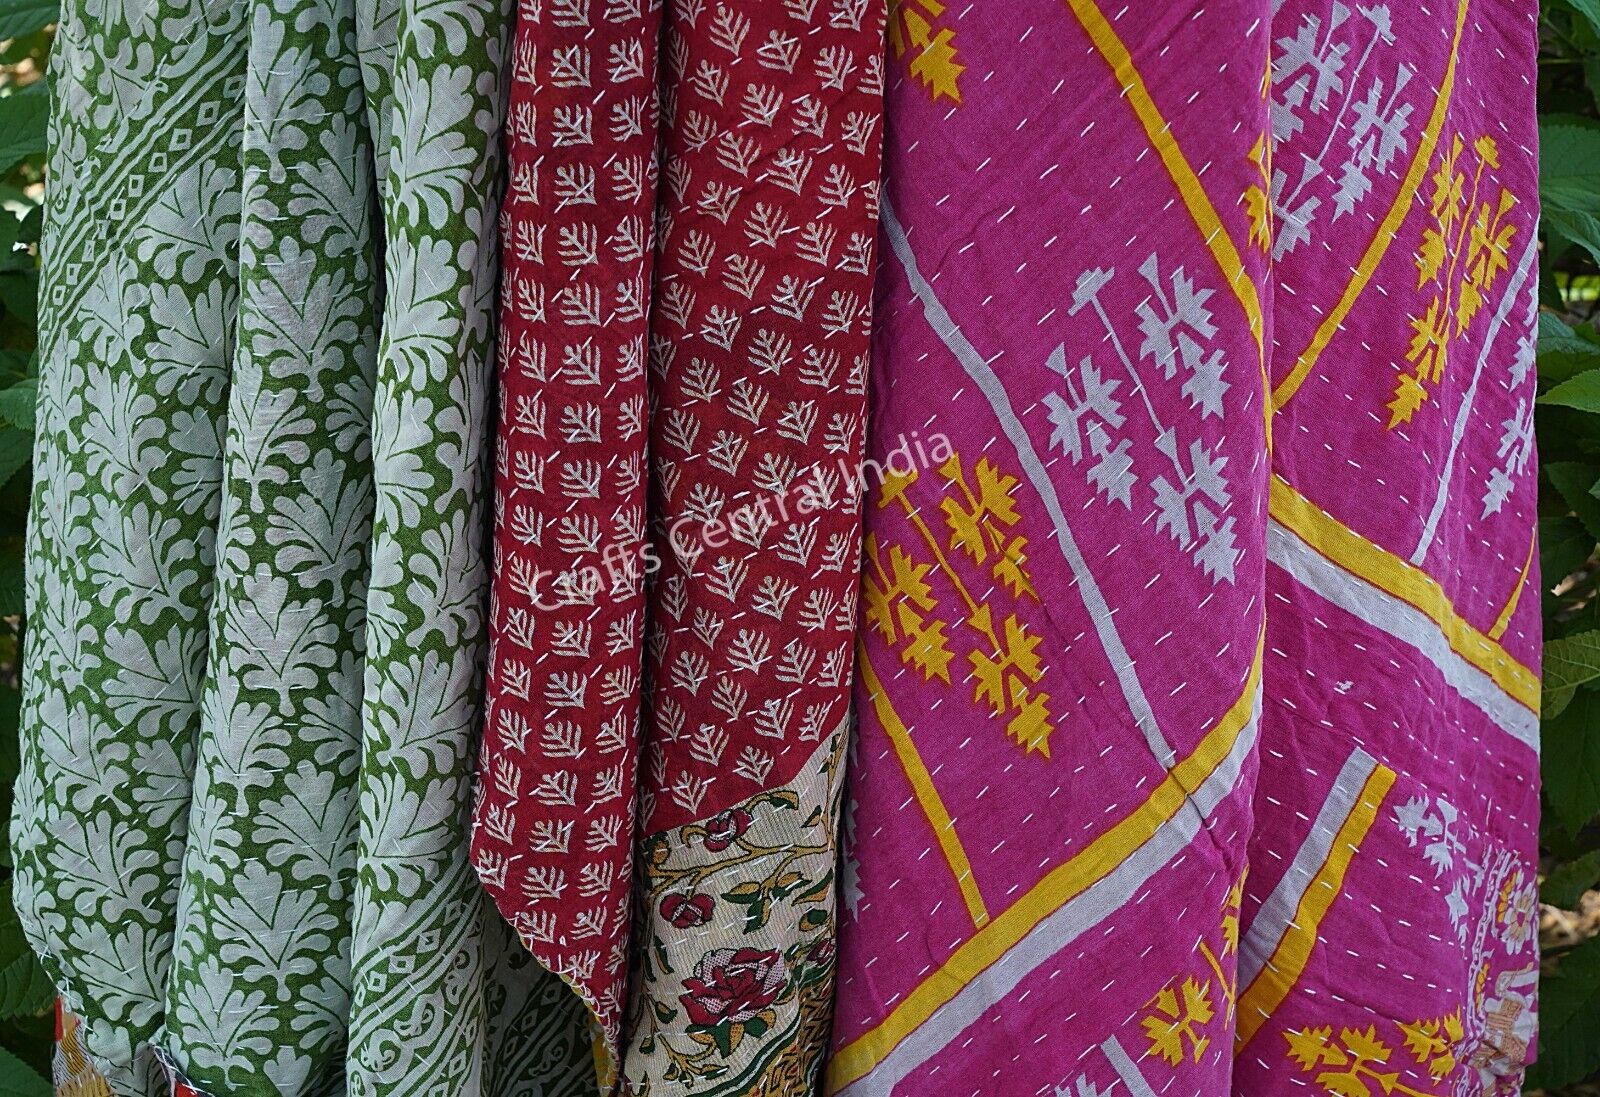 Wholesale Lot of Indian Handmade Cotton Kantha Quilt Throw Blanket Bedspread